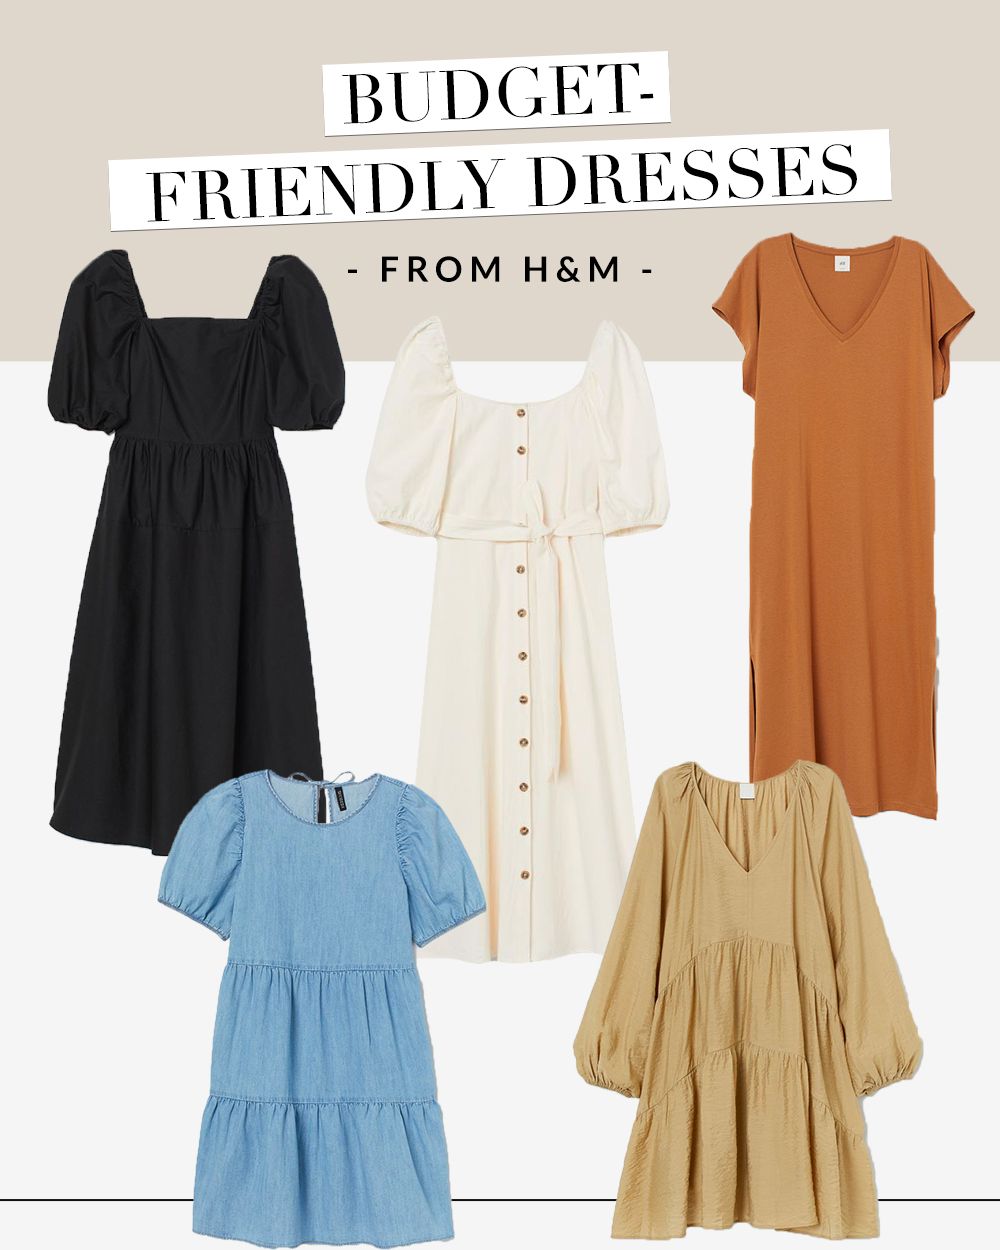 12 Budget-Friendly Dresses That You Need to See